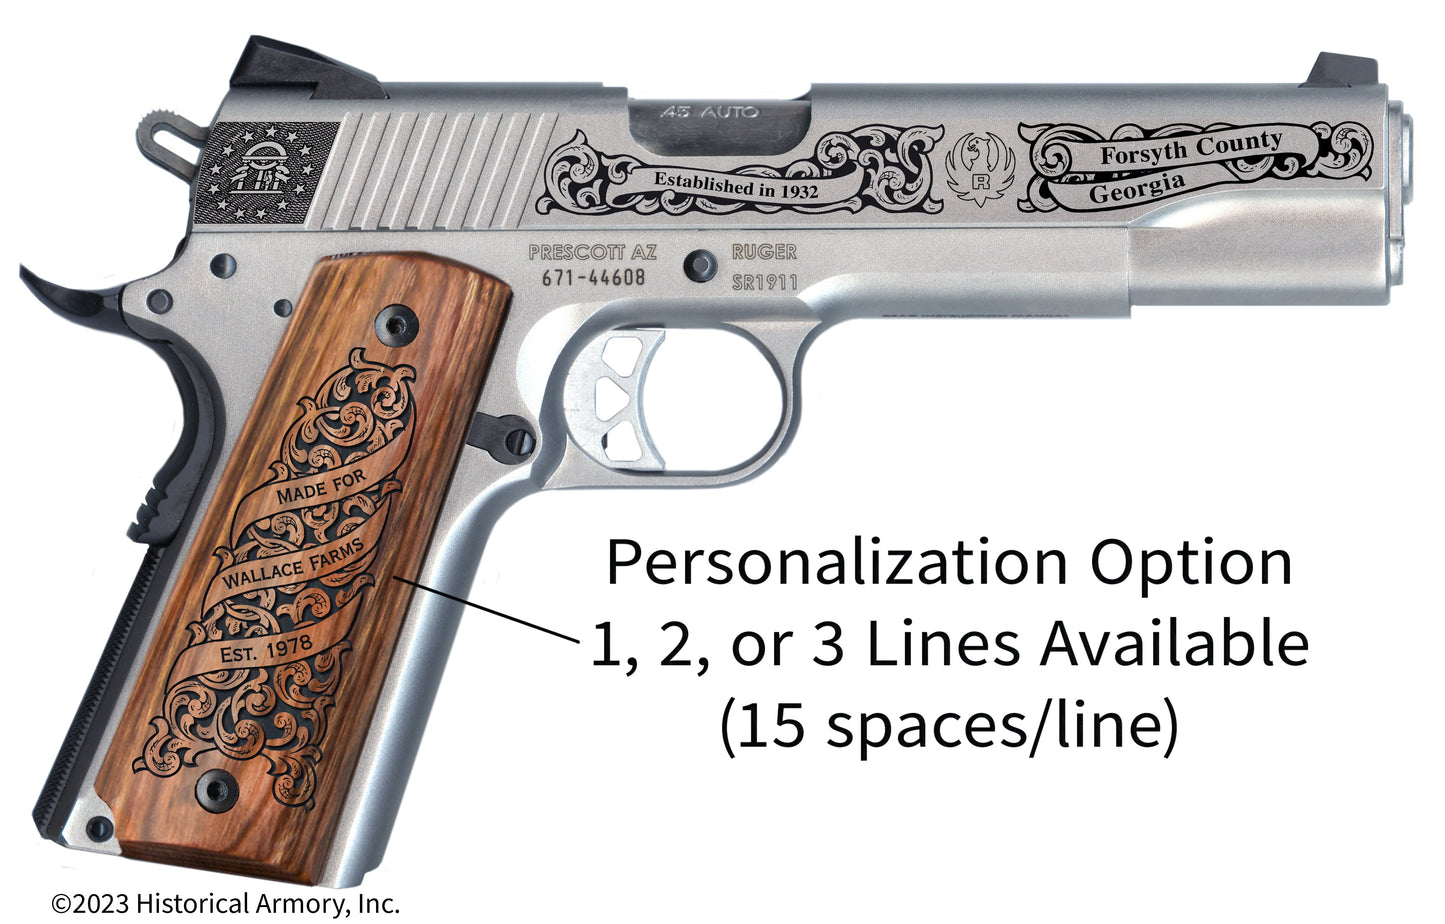 Forsyth County Georgia Personalized Engraved .45 Auto Ruger 1911